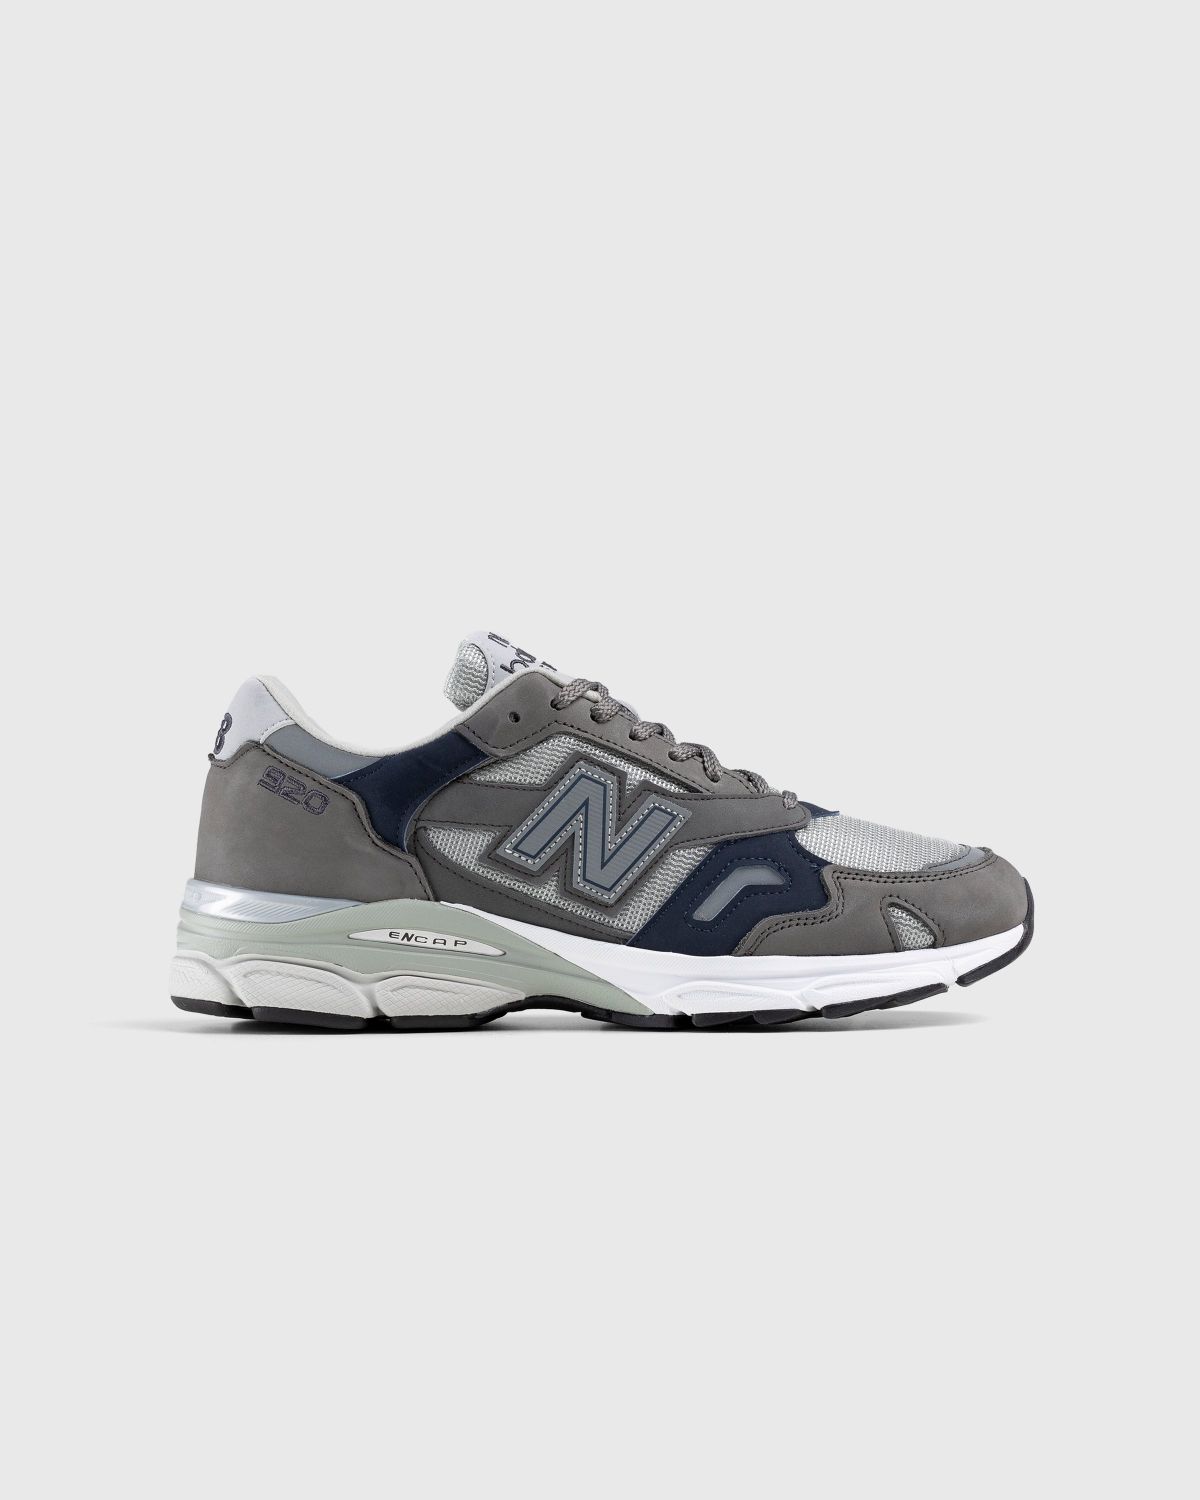 New Balance – M920GNS Grey/Navy - Low Top Sneakers - Grey - Image 1